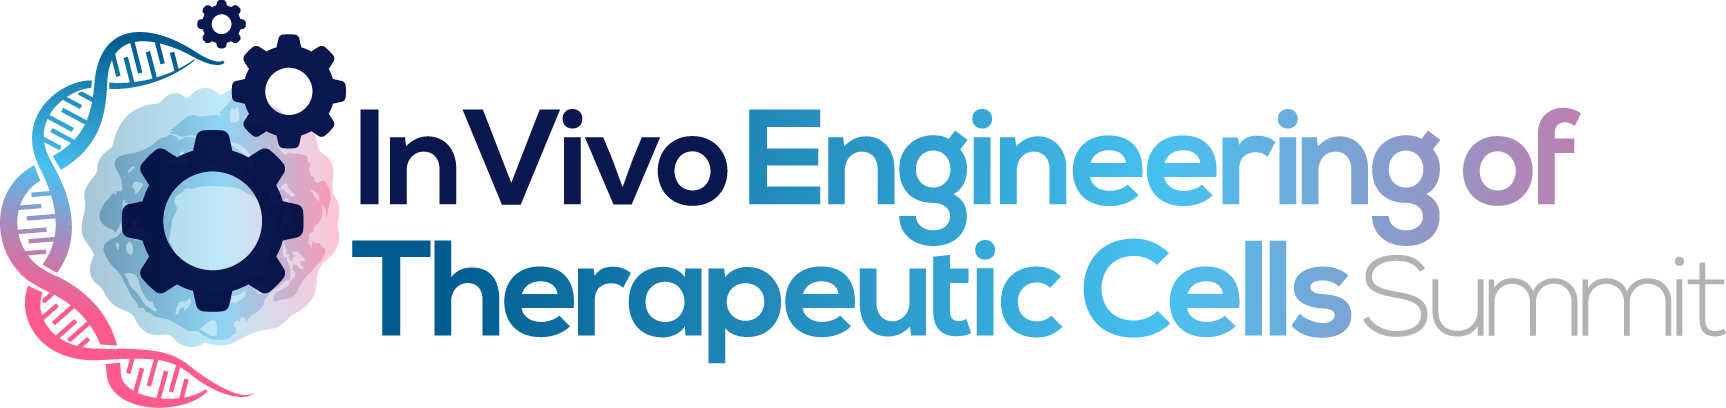 In-Vivo-Engineering-of-Therapeutic-Cells-Summit-Logo